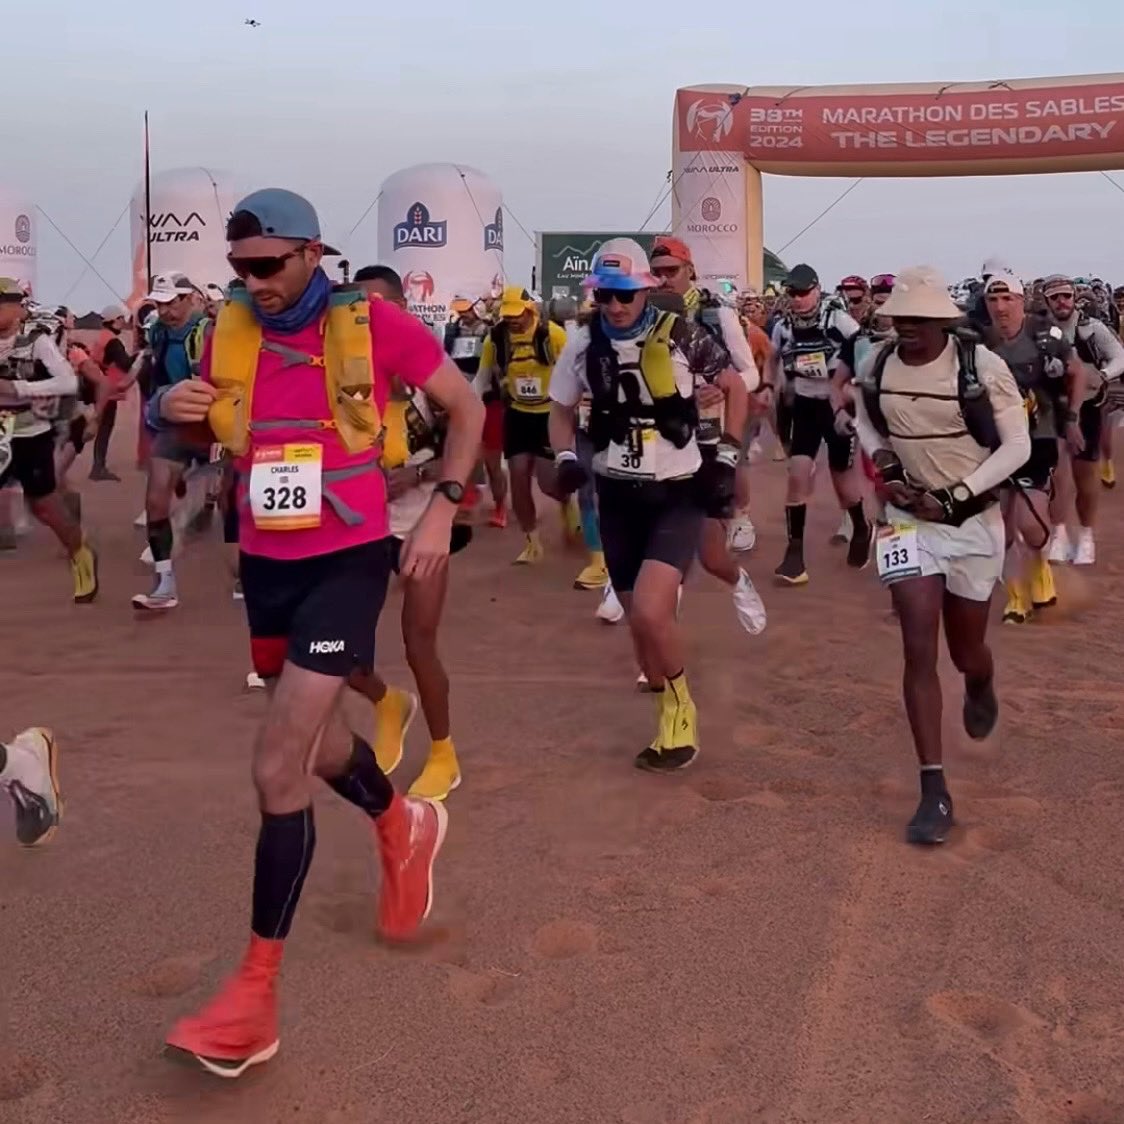 Well done to Mr Langley who has completed the first 2 stages of #MarathonDesSables - 31.1km yesterday & 40.8km today in the intense heat of the Moroccan Sahara. Tomorrow is the longest stage - 85.3km! You can follow his progress and donate via the links in the comments below.